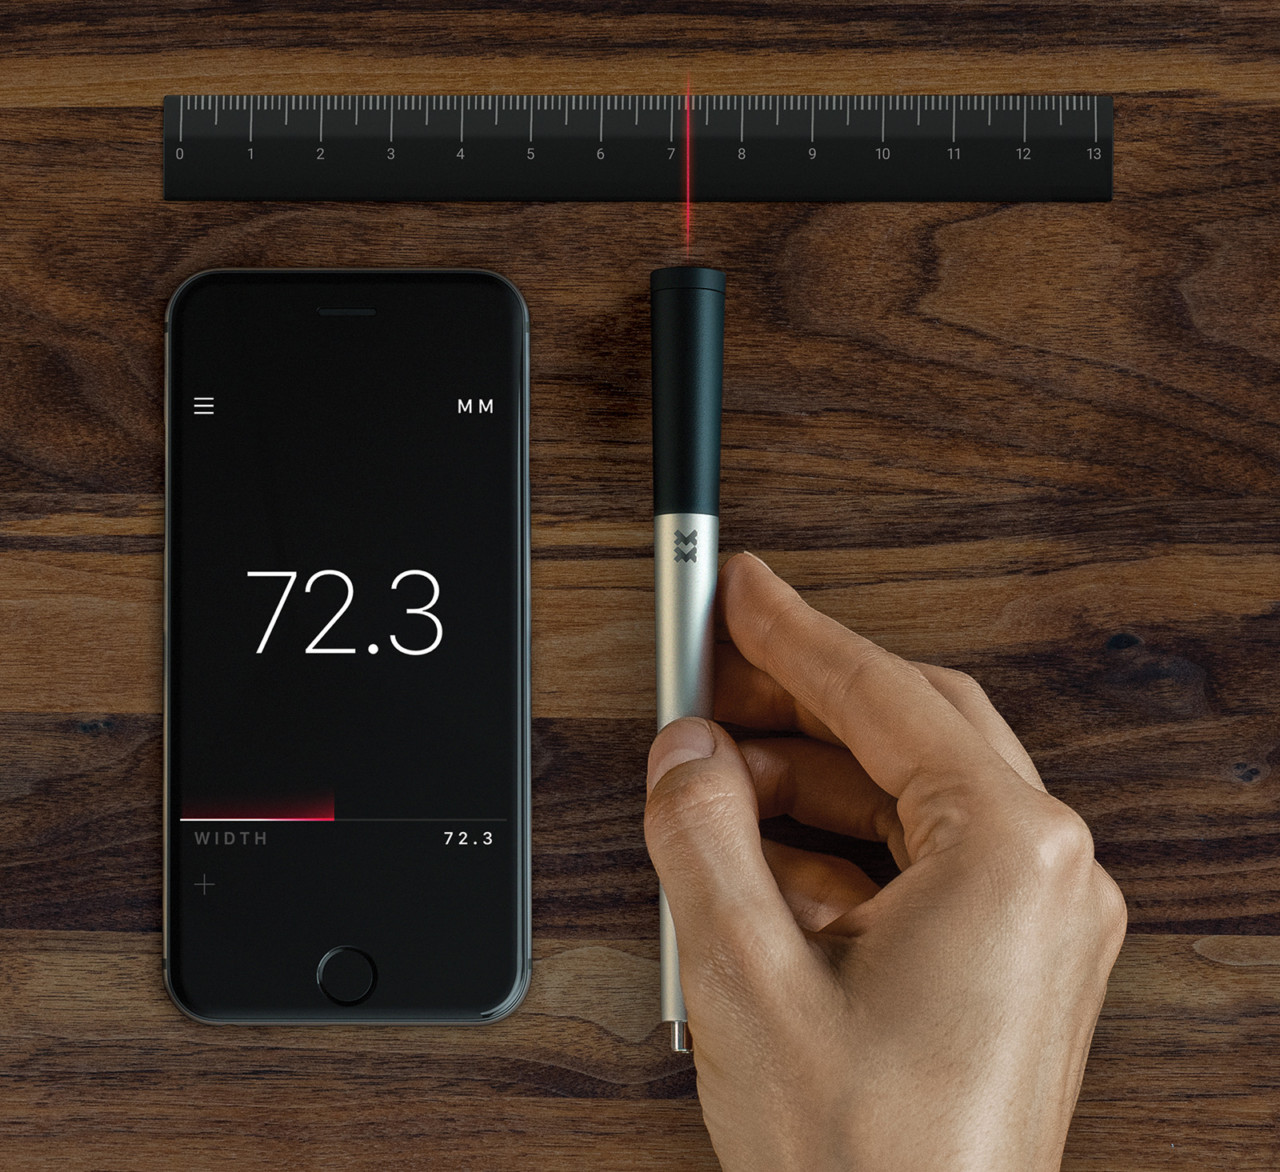 The InstruMMents 01 Makes Measuring Immeasurably Easier